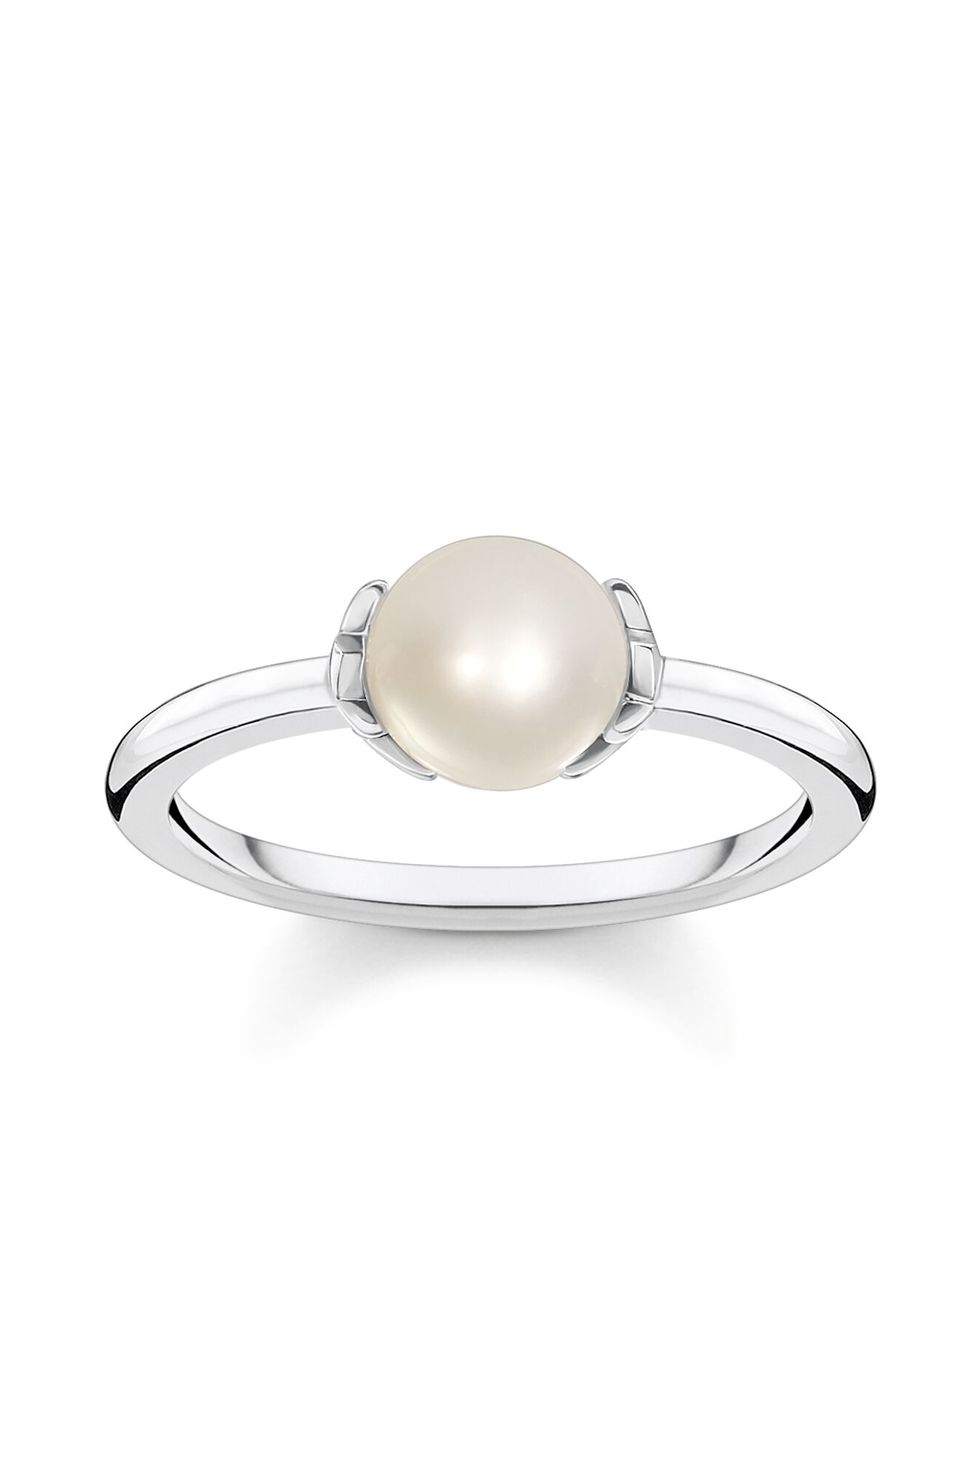 Why pearls are the jewellery trend of the moment